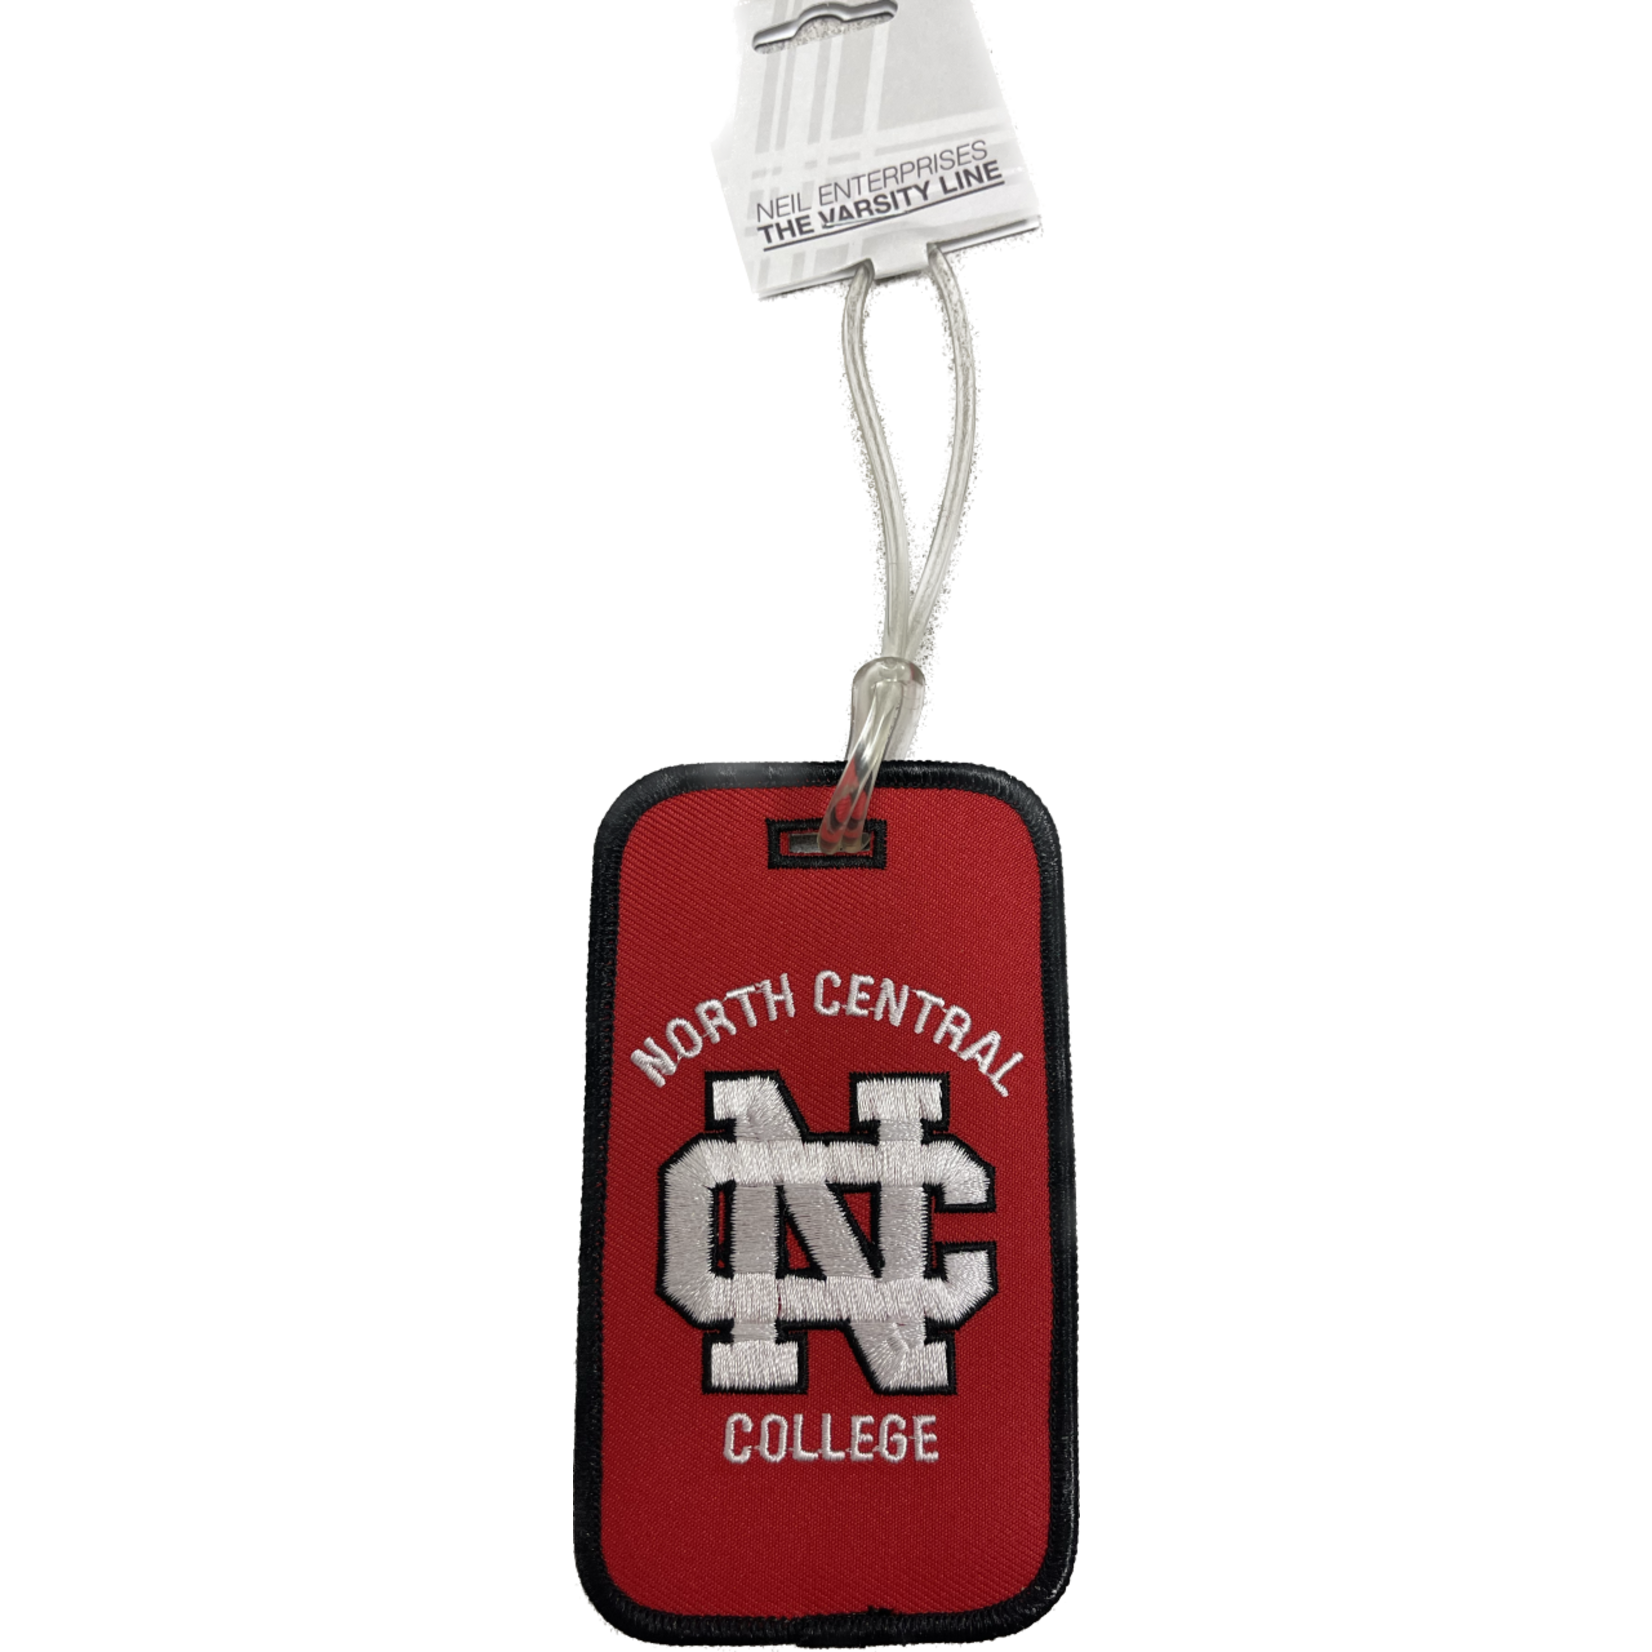 Neil Enterprises North Central College Luggage Tag